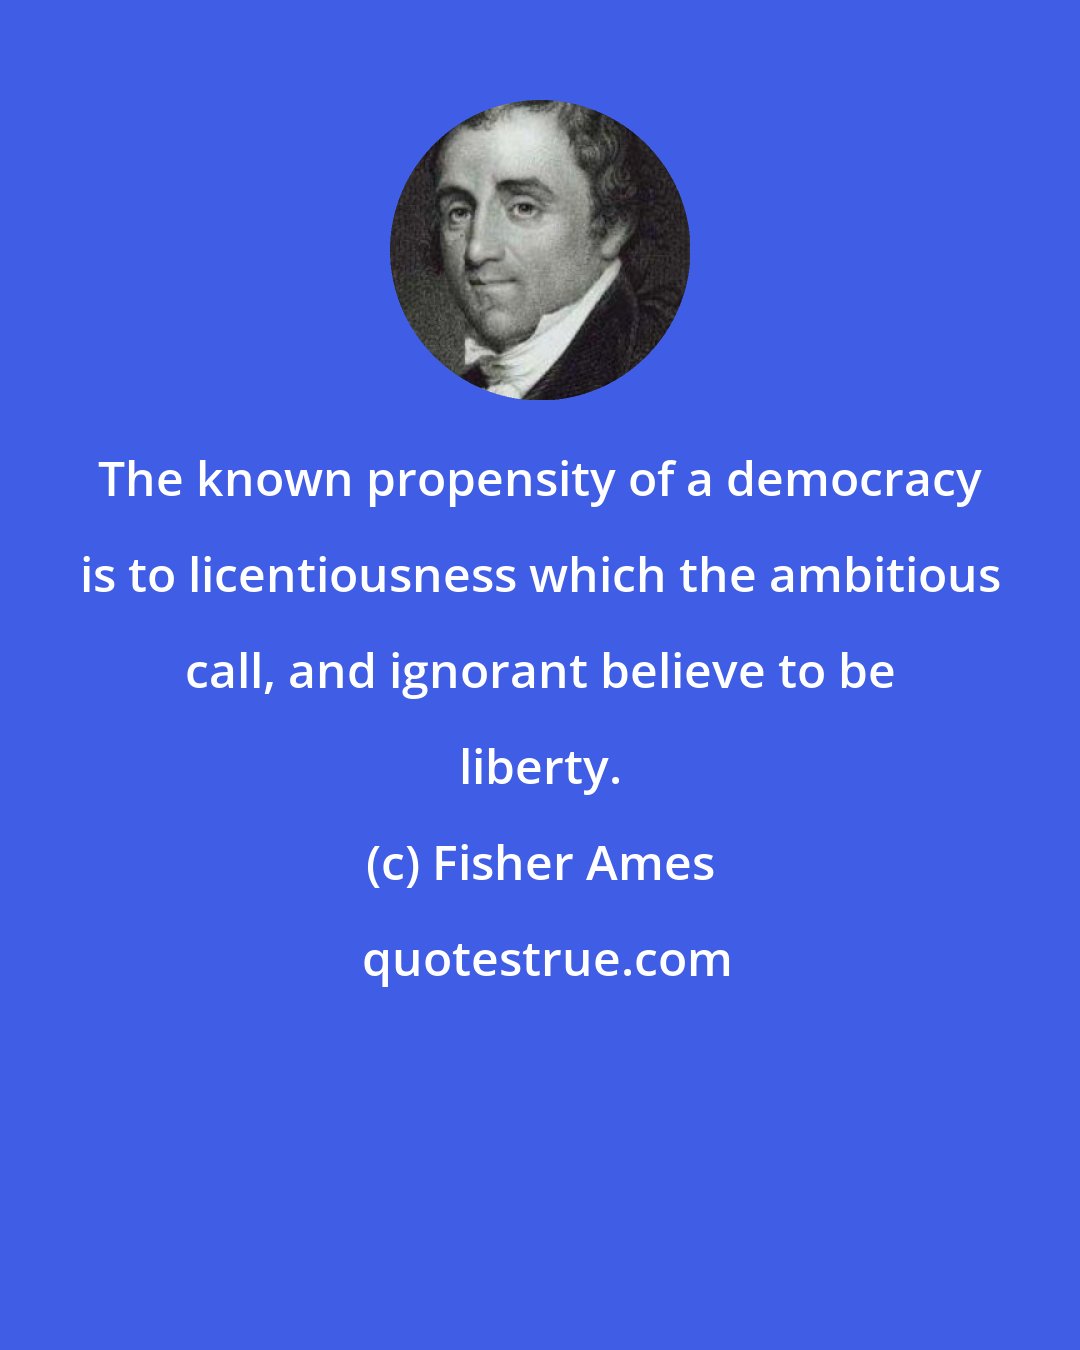 Fisher Ames: The known propensity of a democracy is to licentiousness which the ambitious call, and ignorant believe to be liberty.